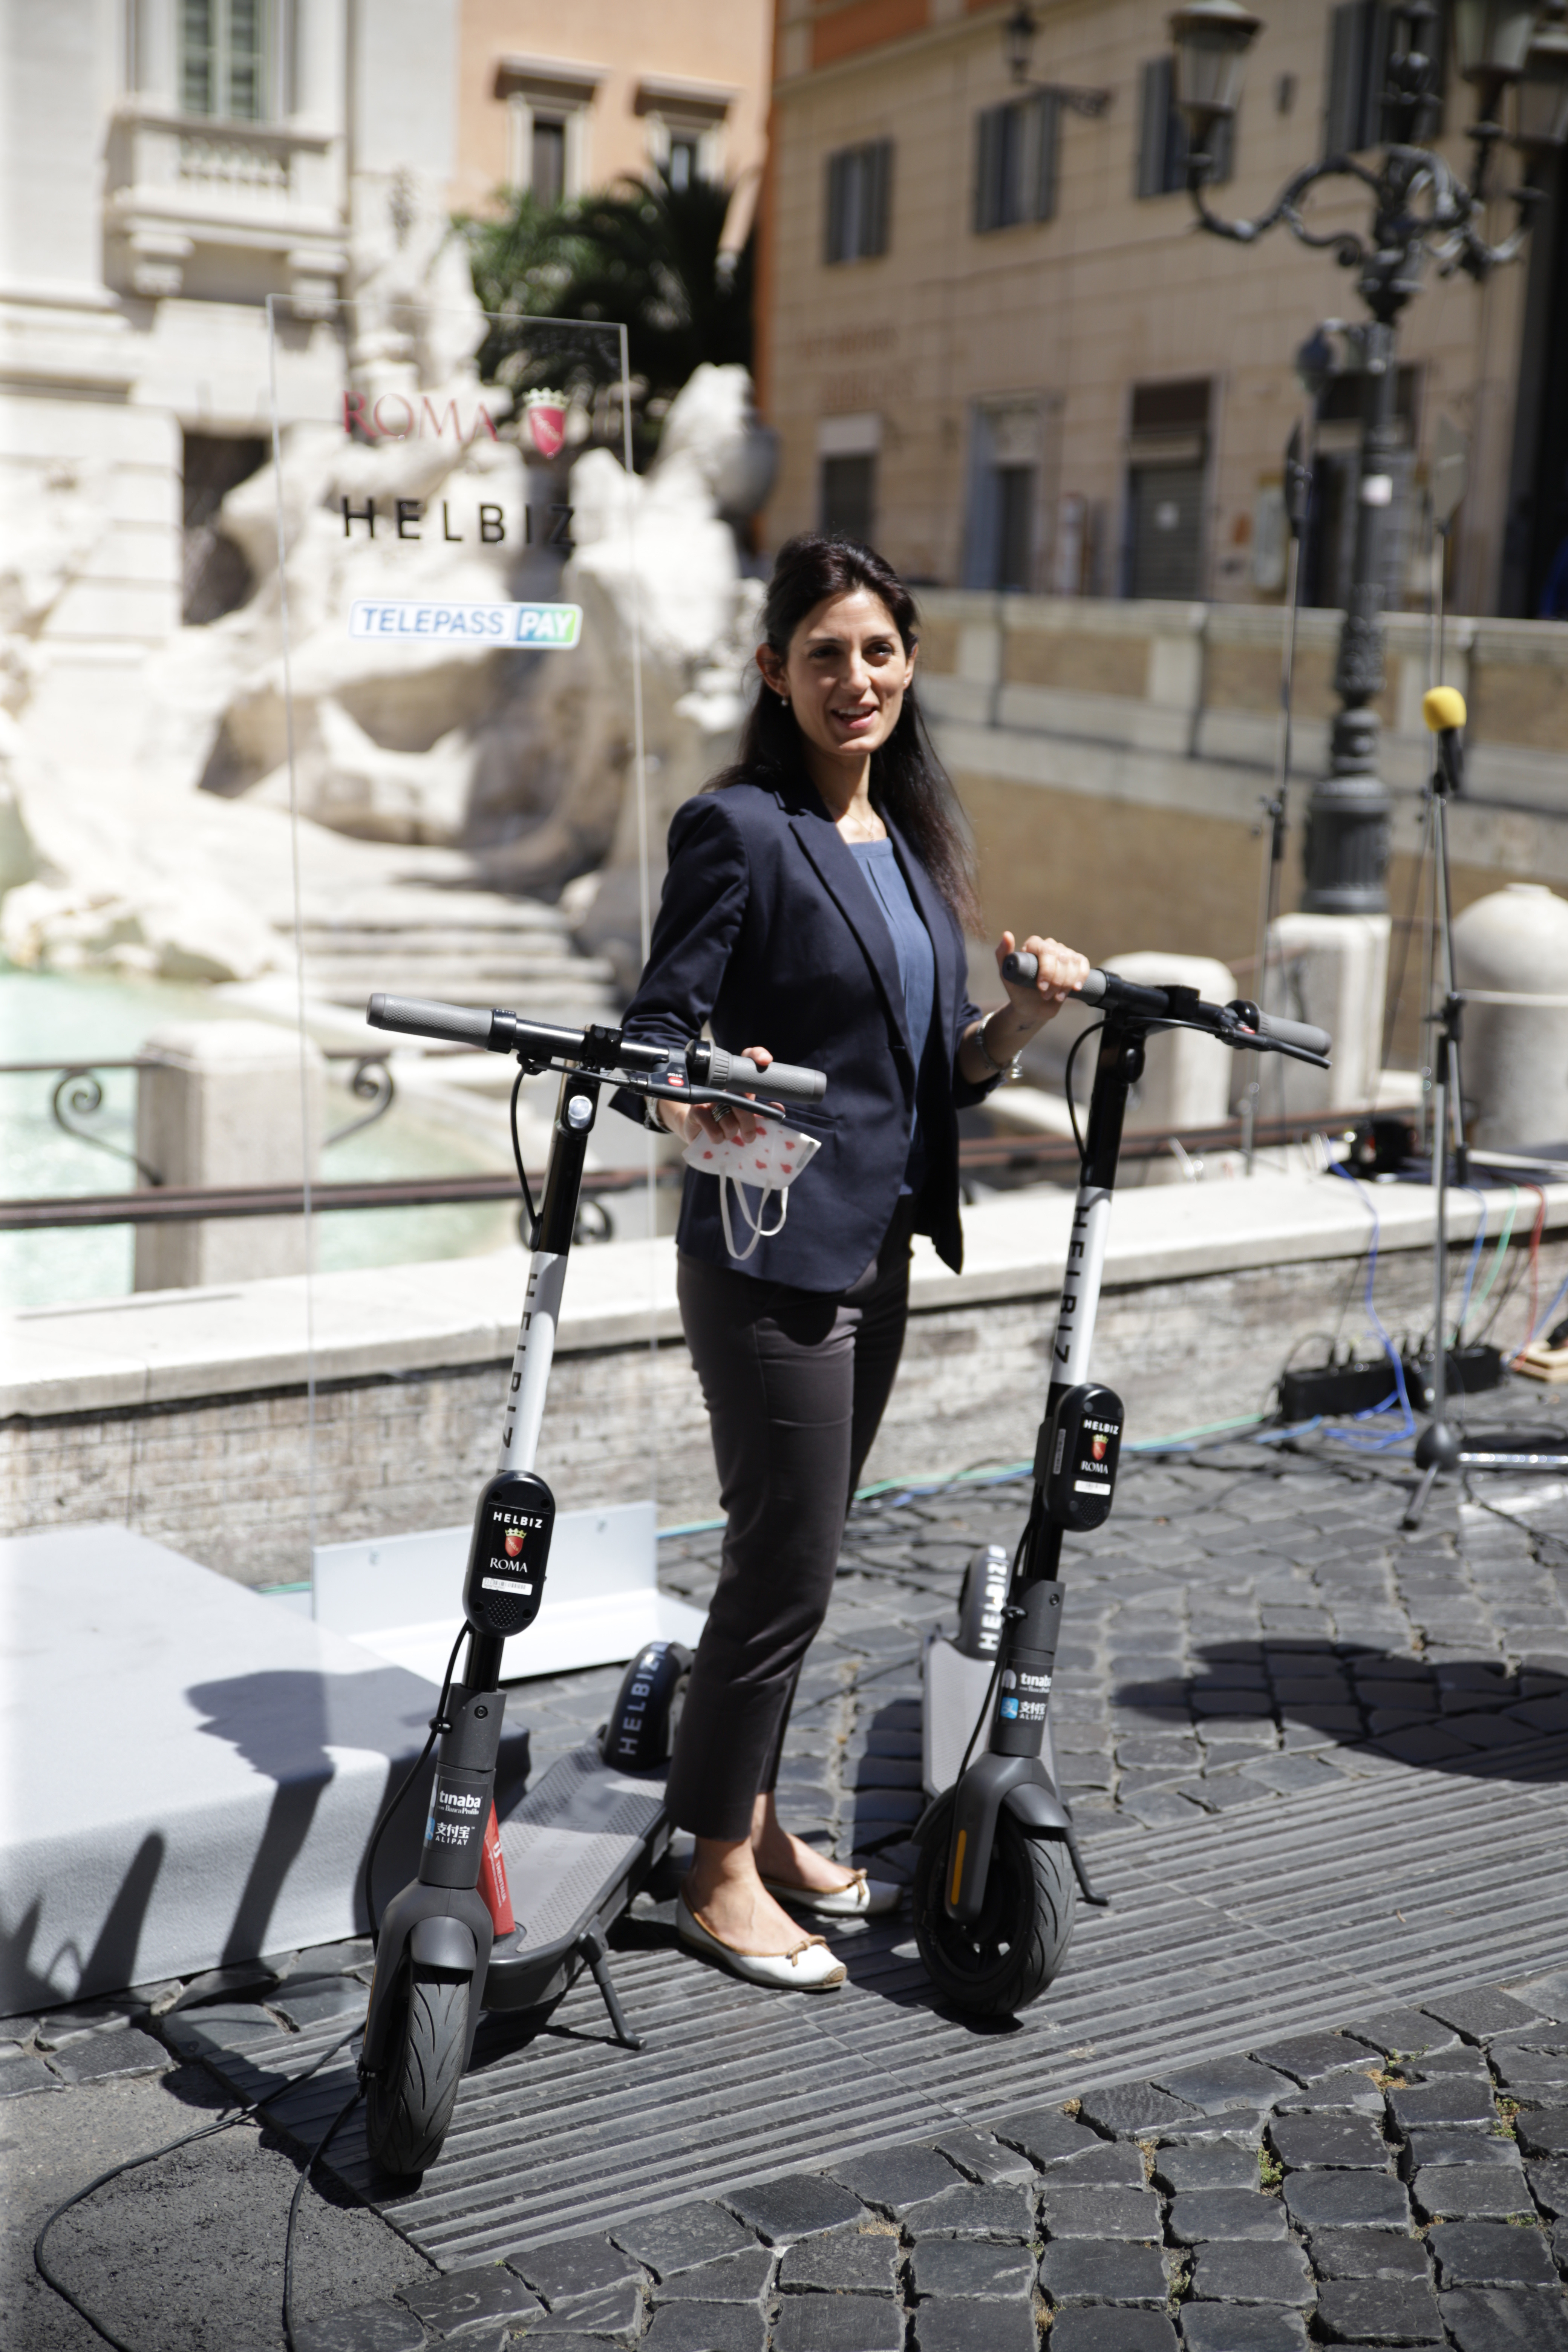 As Opens its Doors to the World, Helbiz Launches the First Electric Scooters in Rome Business Wire